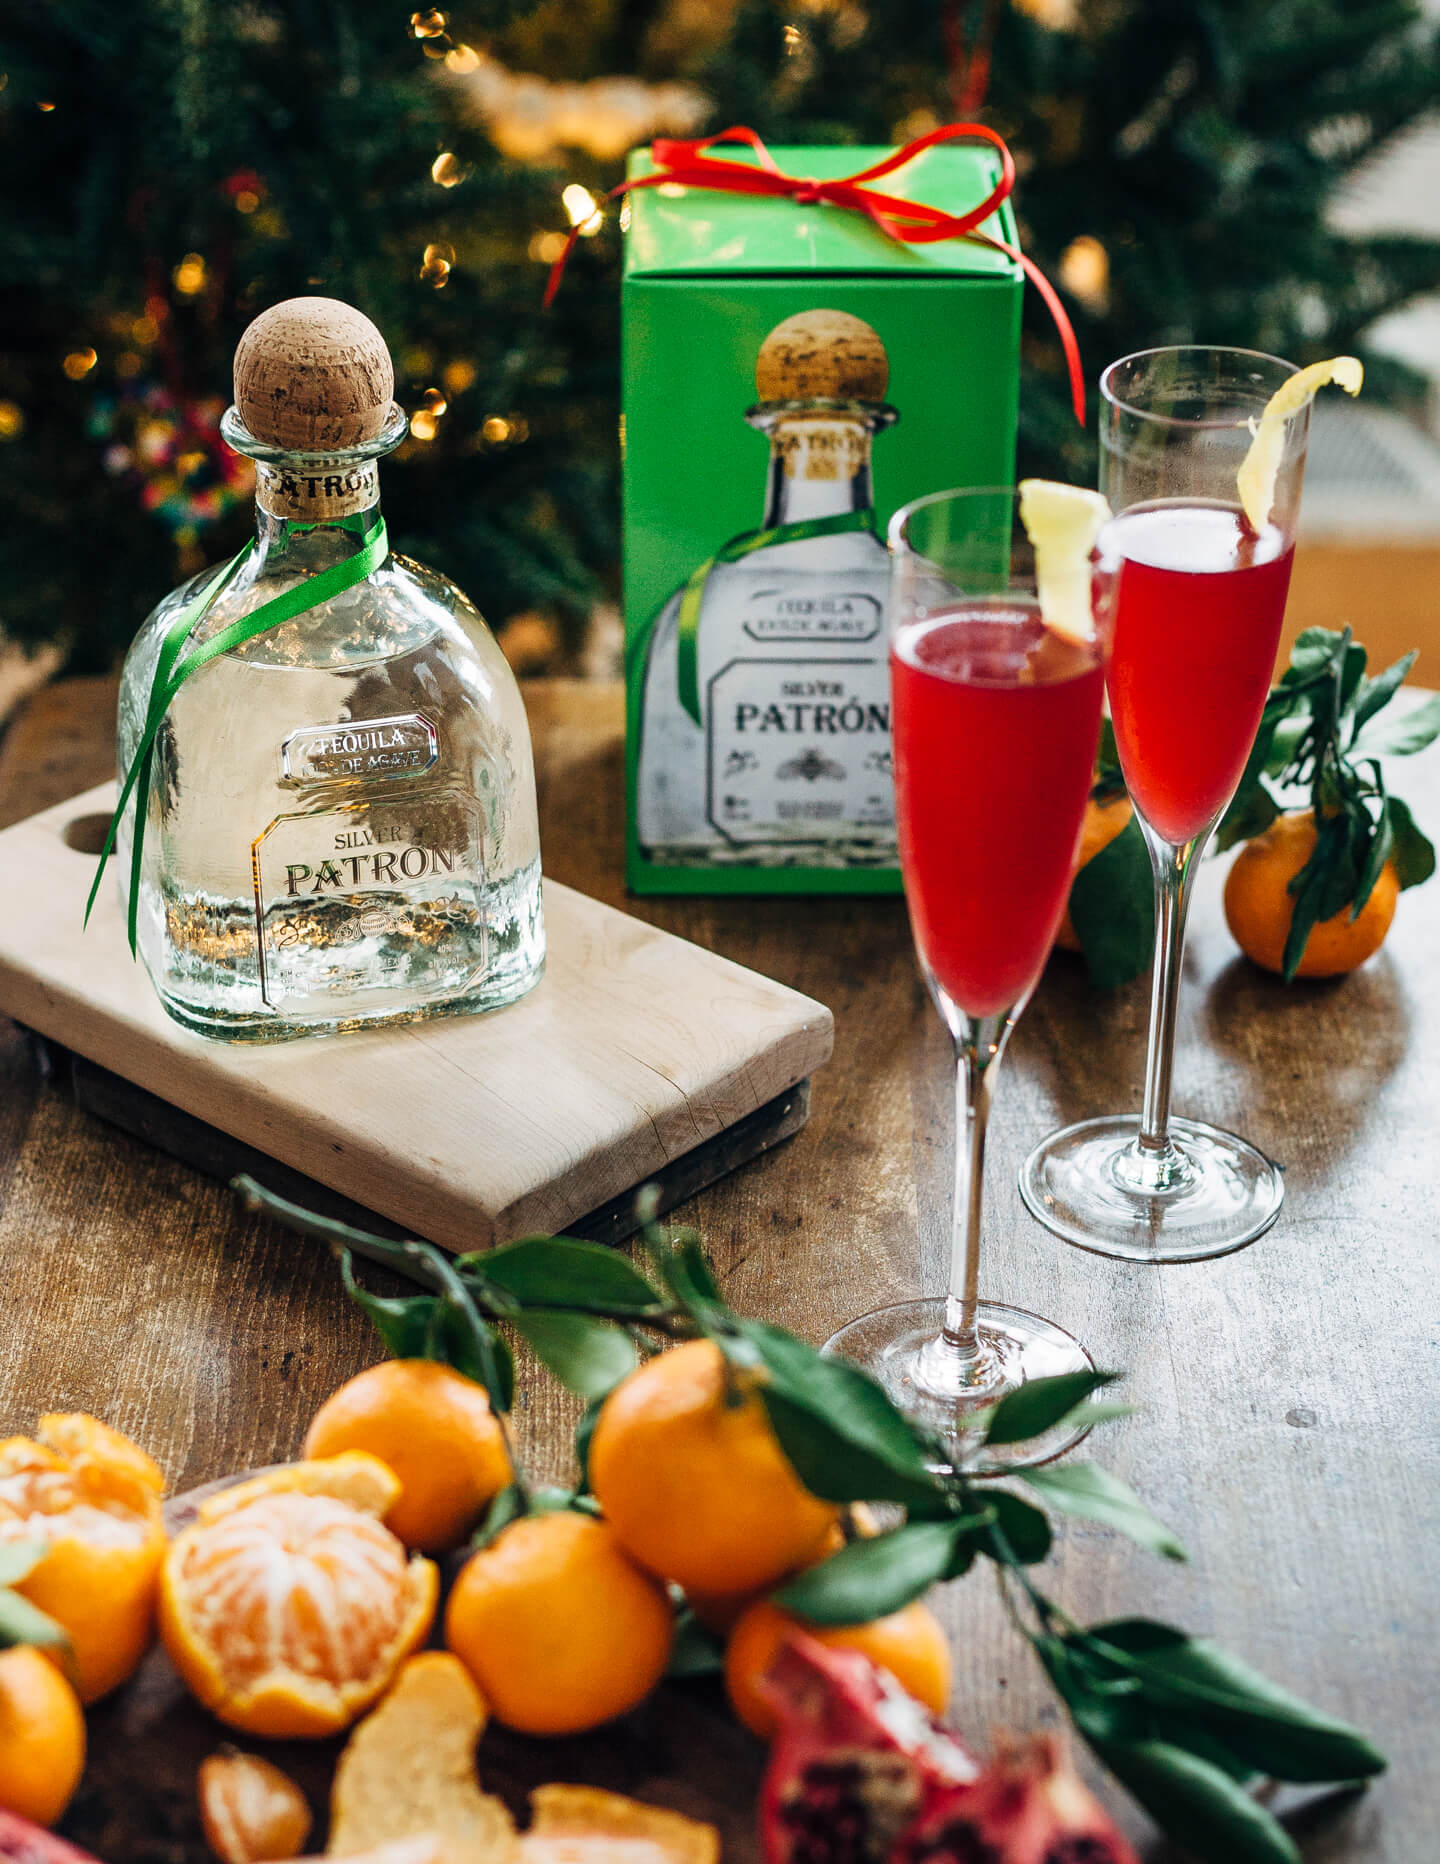 These Patrón Ruby Spritzer cocktails make for a wonderfully refreshing, jewel-toned drink perfect for the holiday season. 